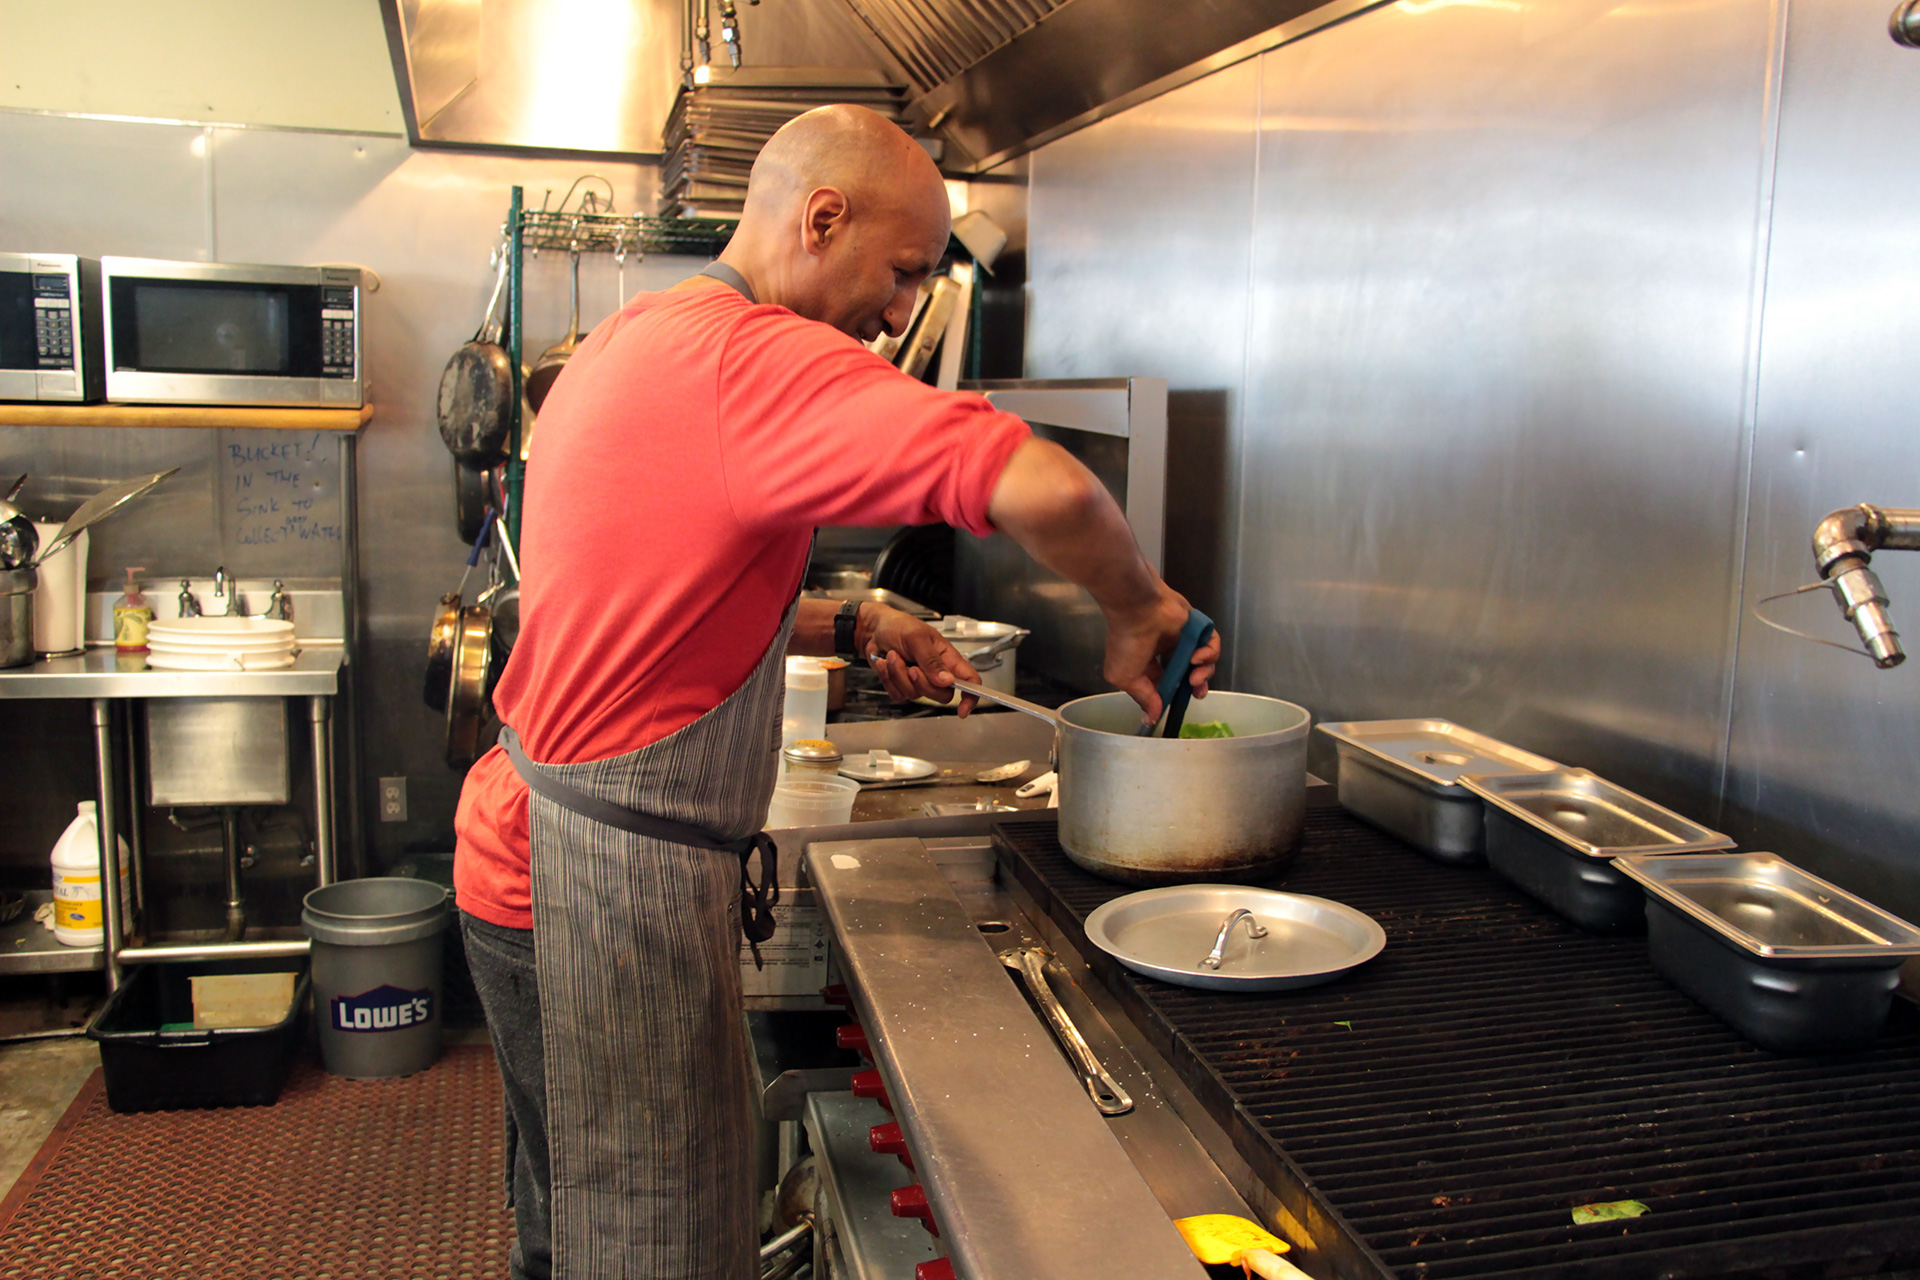 Eskender Aseged, owner/chef at Radio Africa, cooking in the kitchen.